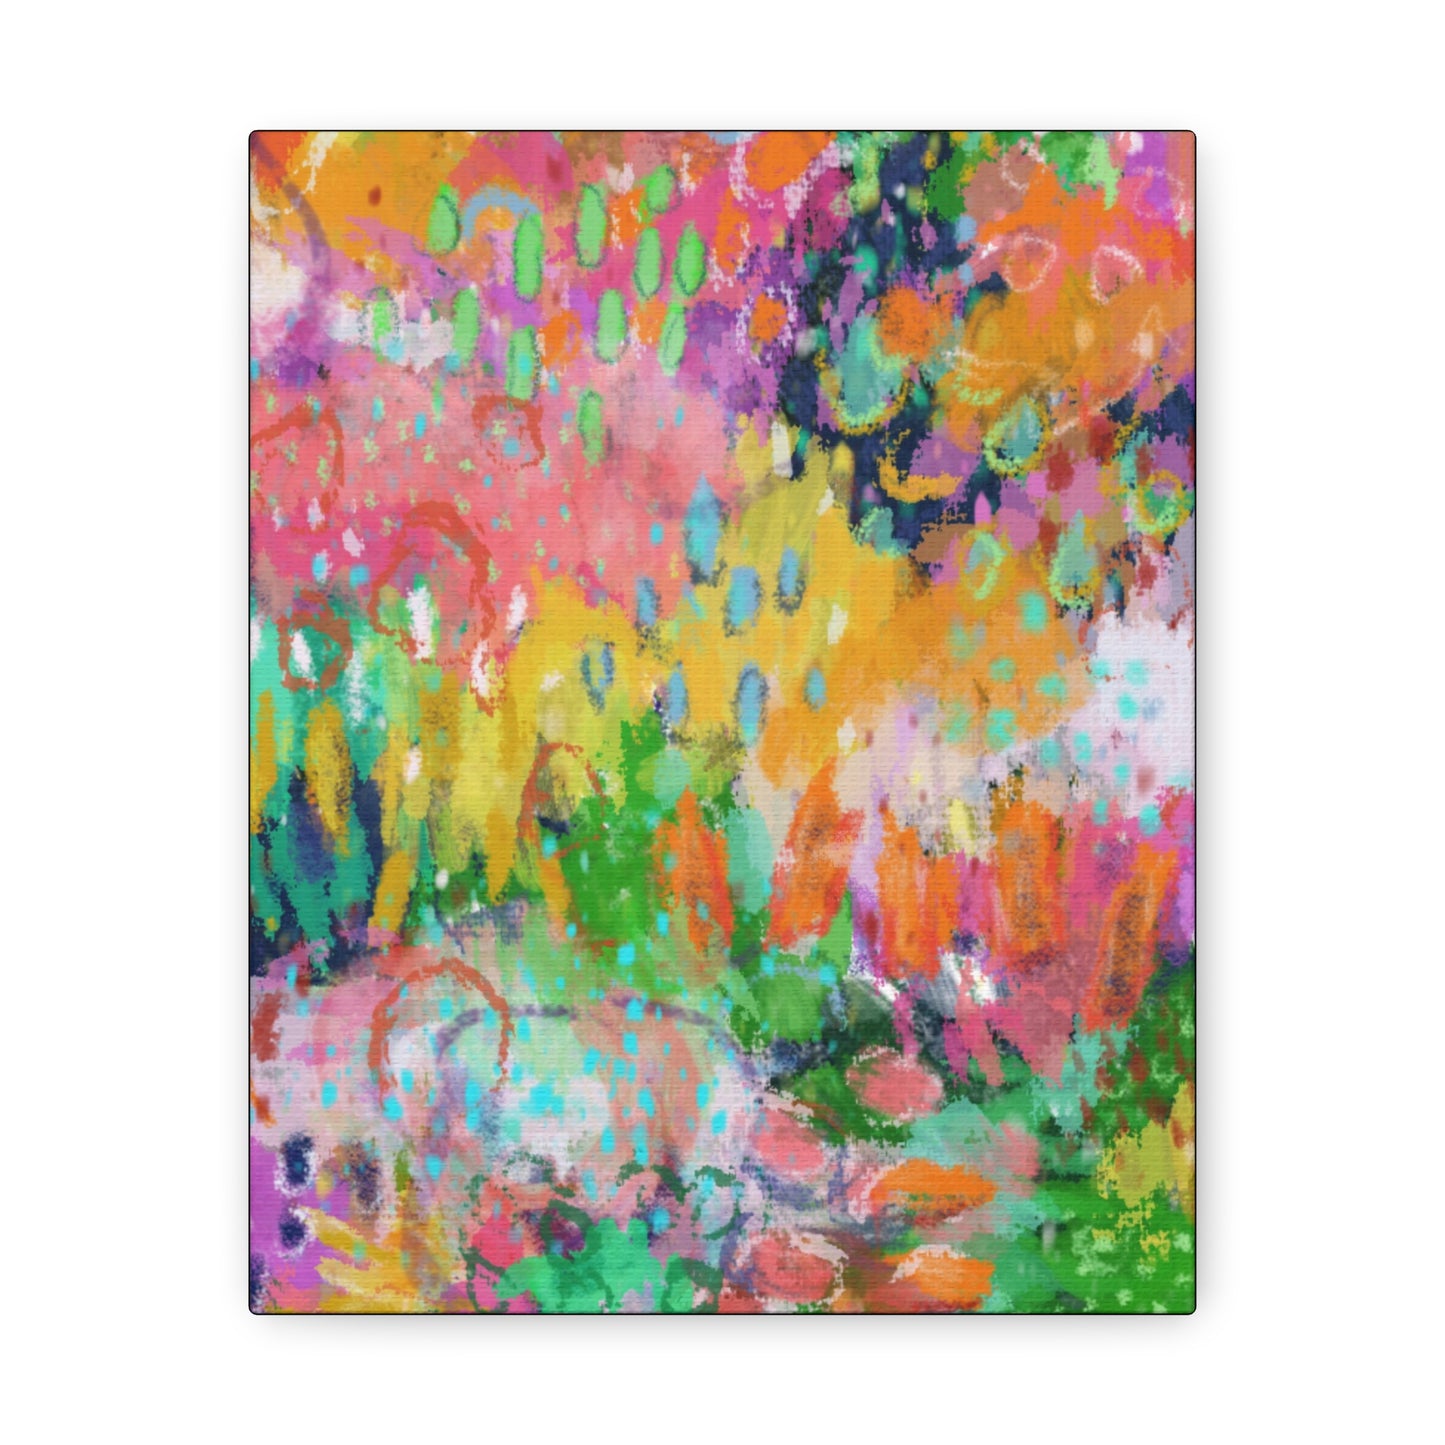 Bloom Gallery Wrapped Canvas Print